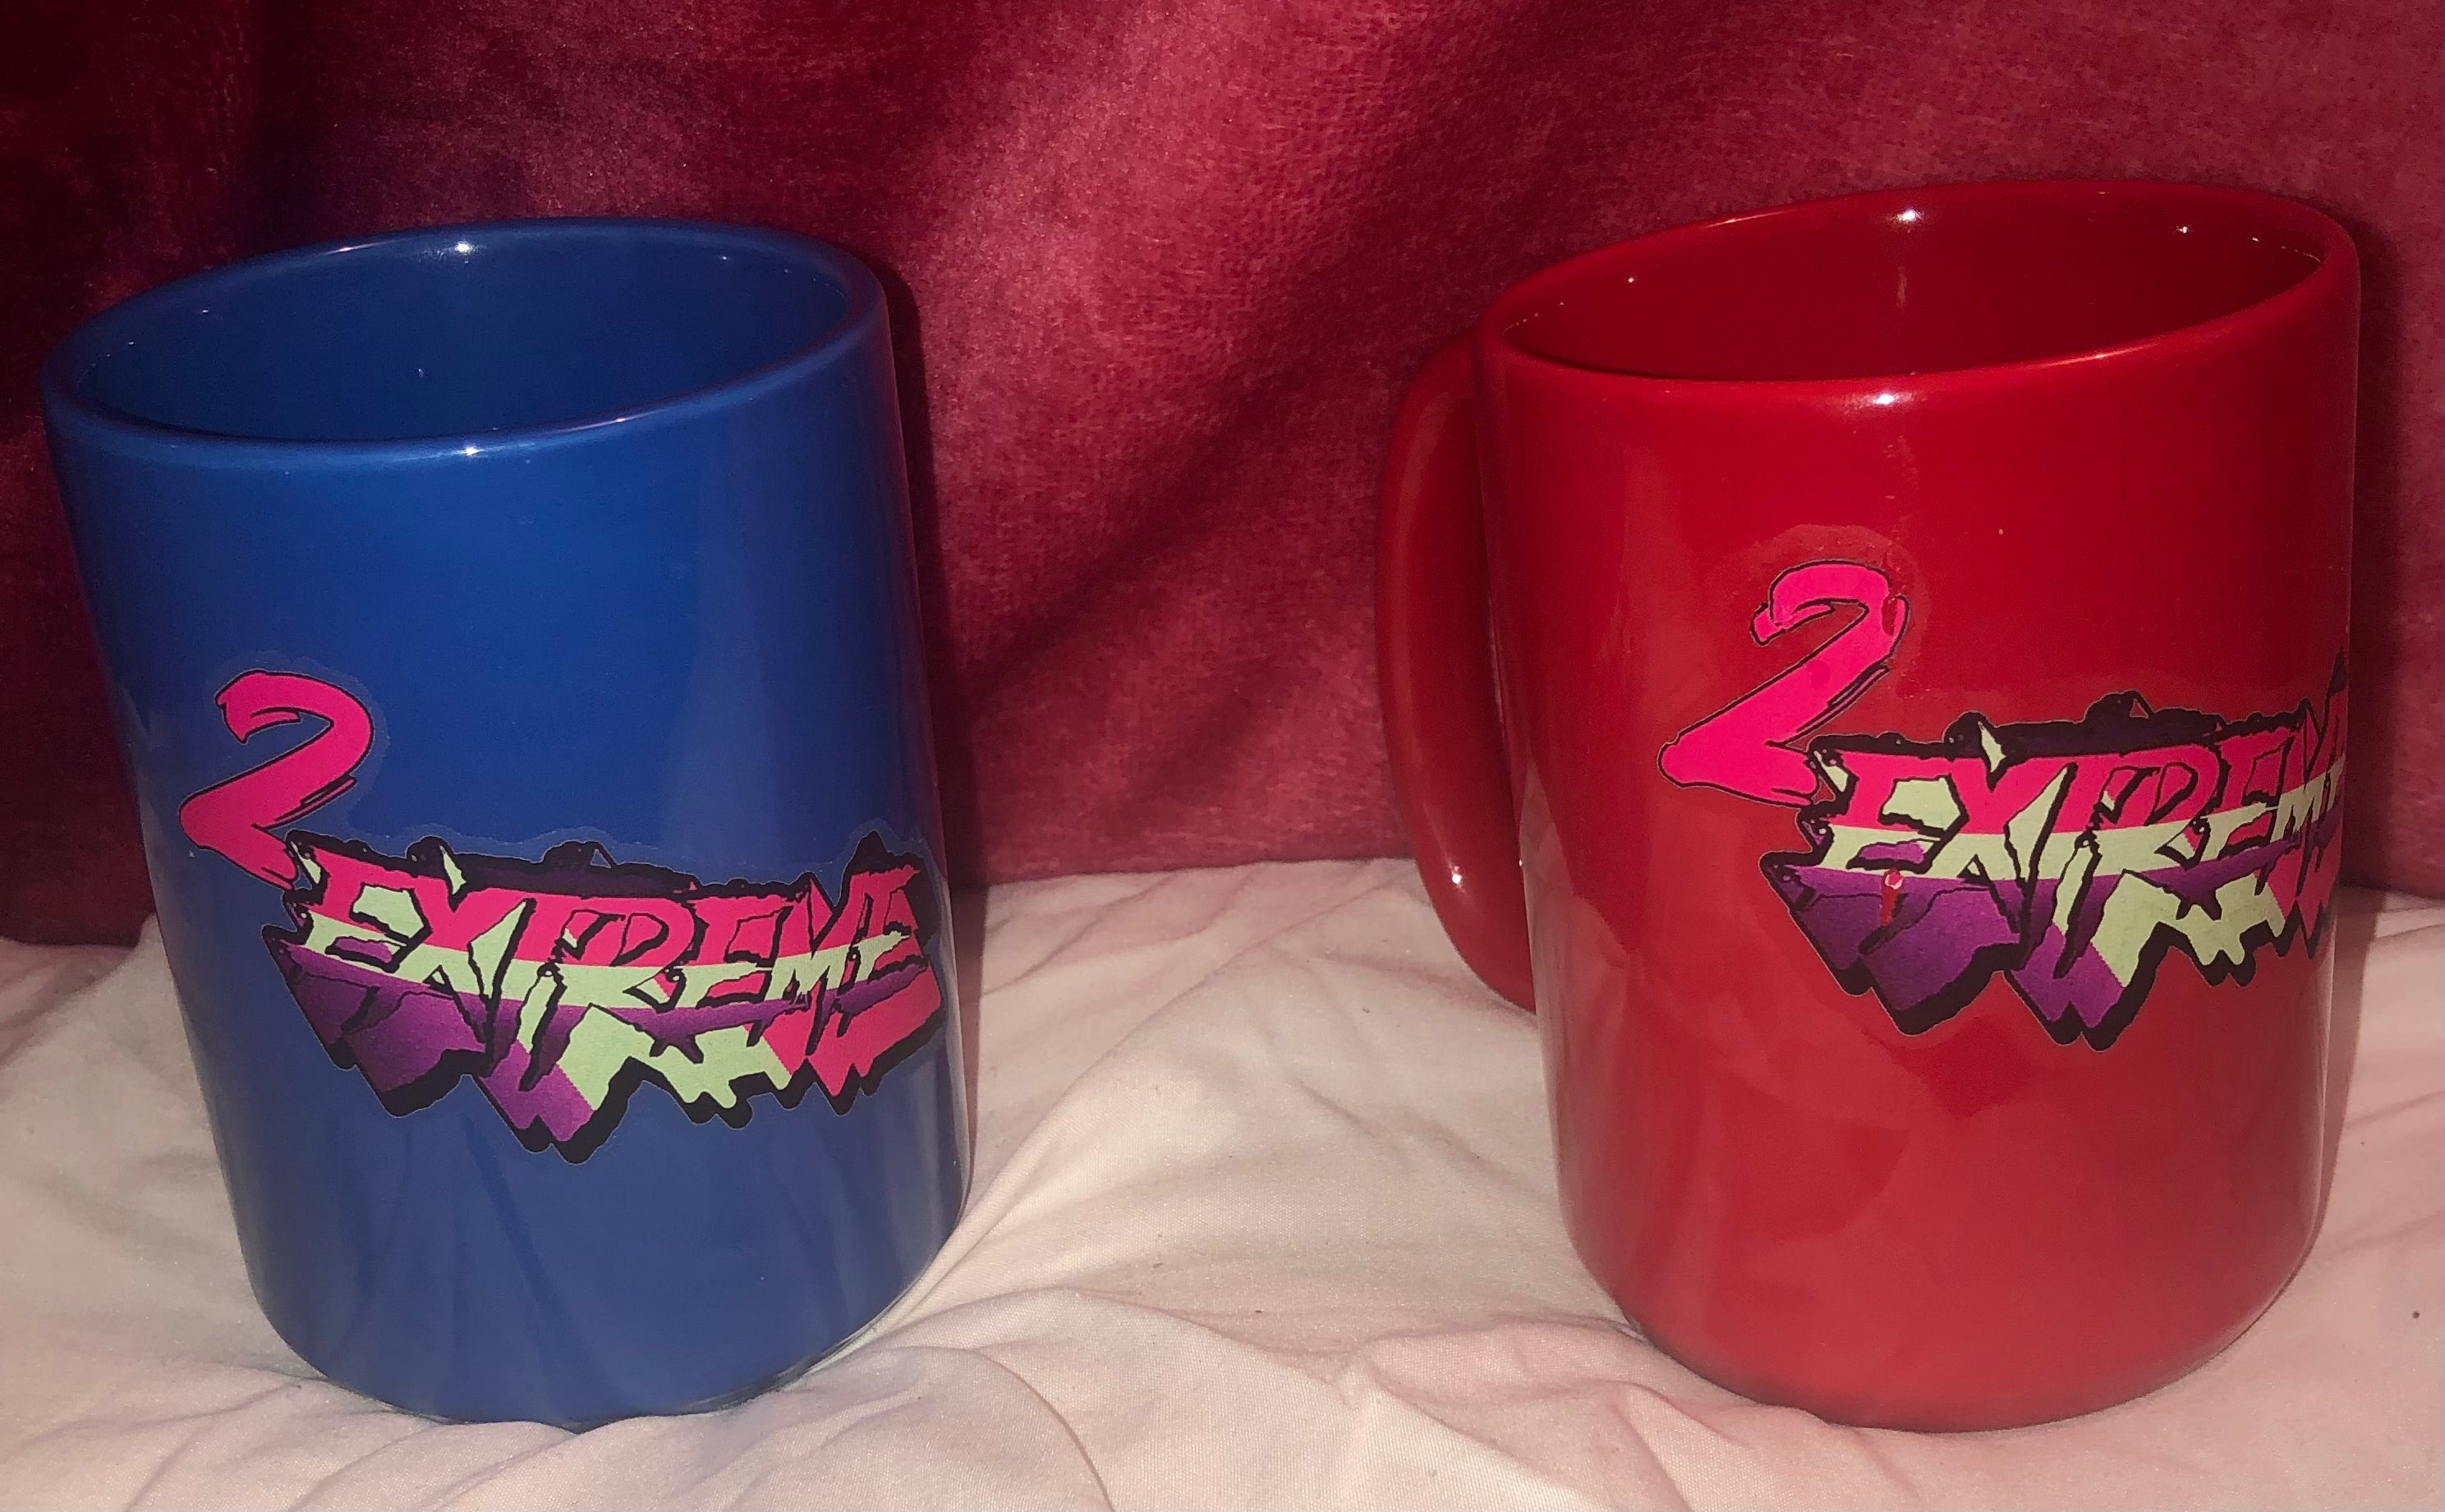 2Extreme- Red & Blue mugs